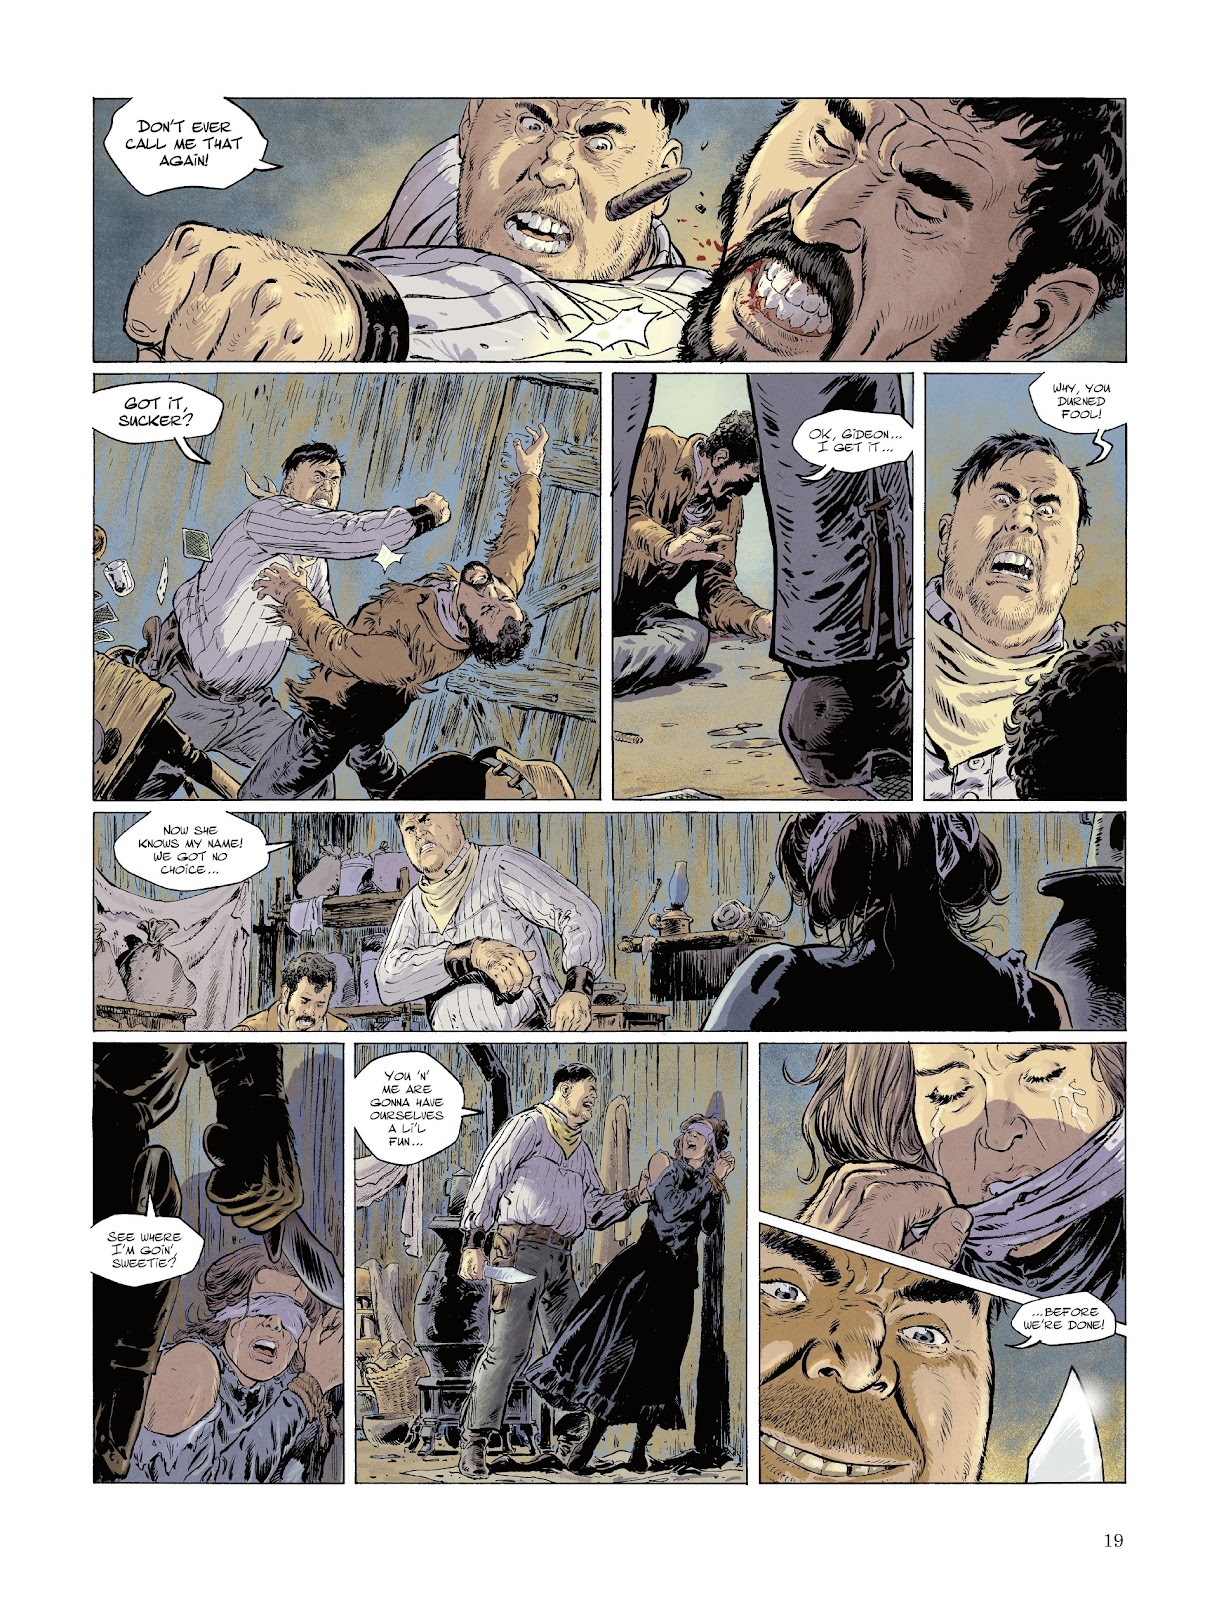 The Tiger Awakens: The Return of John Chinaman issue 1 - Page 20